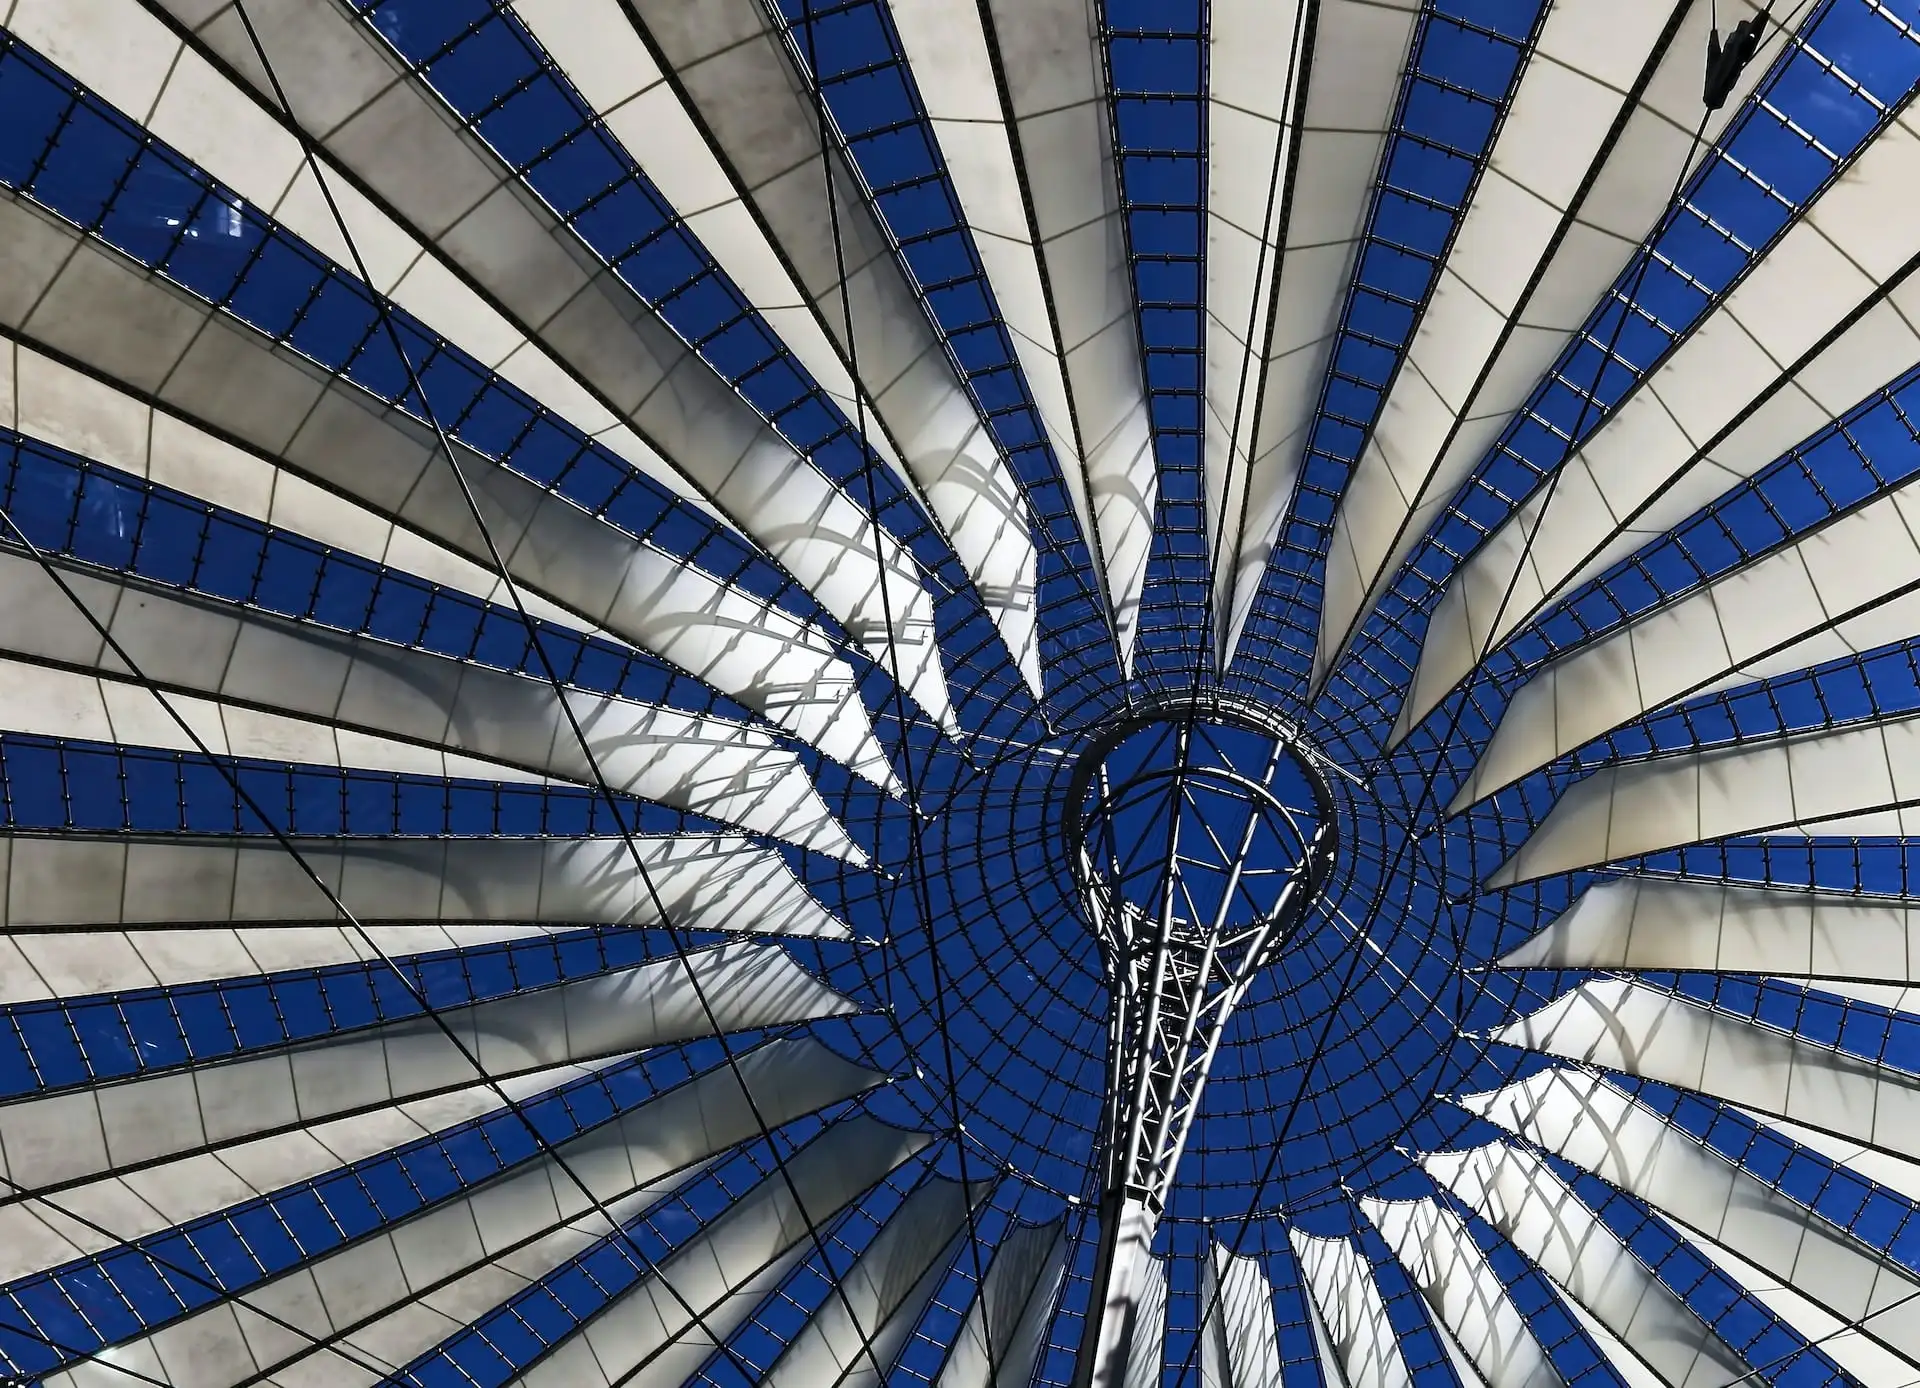 The captivating roof of the Sony Center.